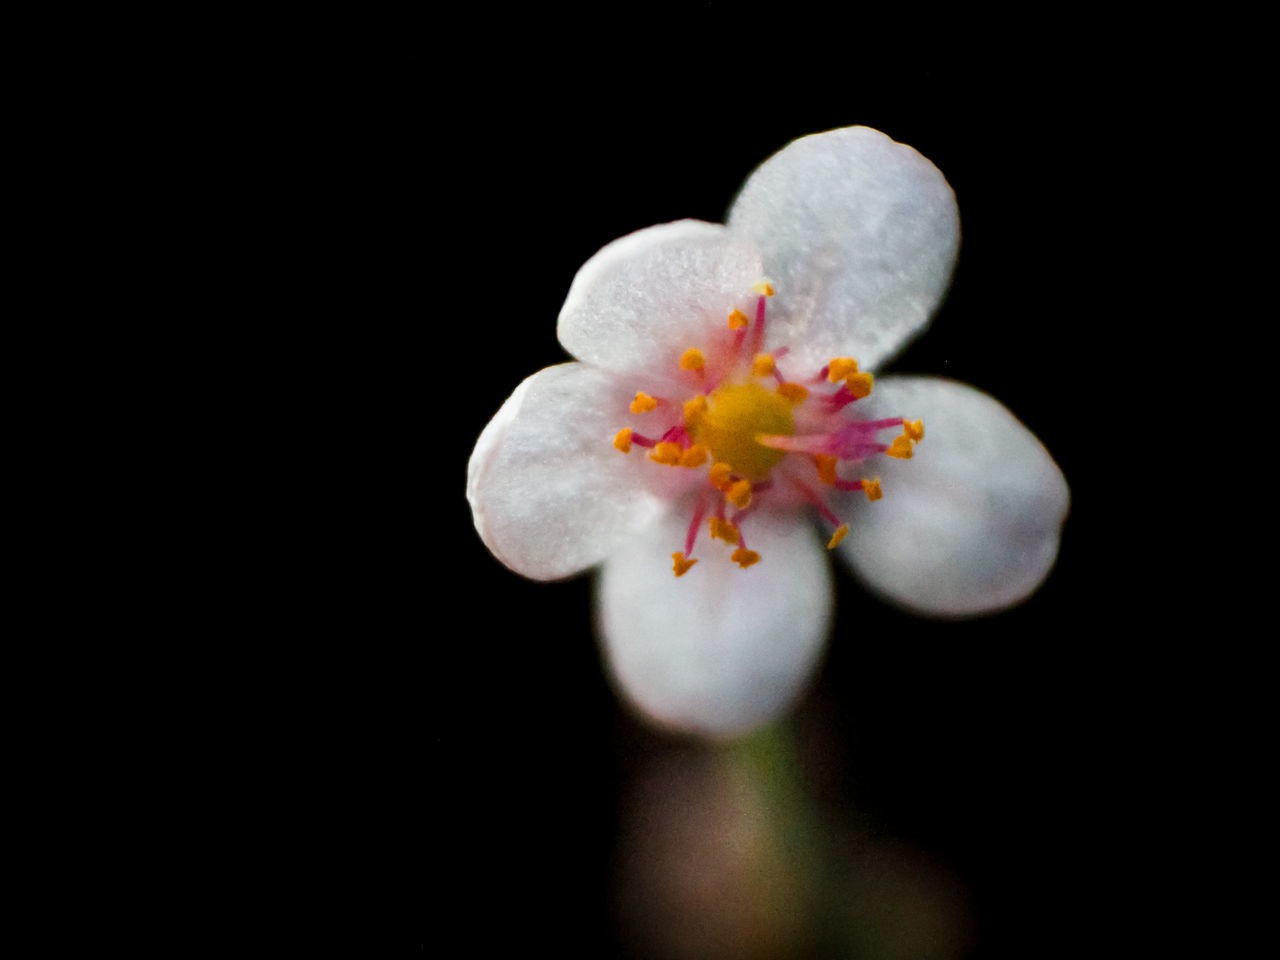 CLOSE-UP OF WHITE CHERRY BLOSSOMS AGAINST BLACK BACKGROUND